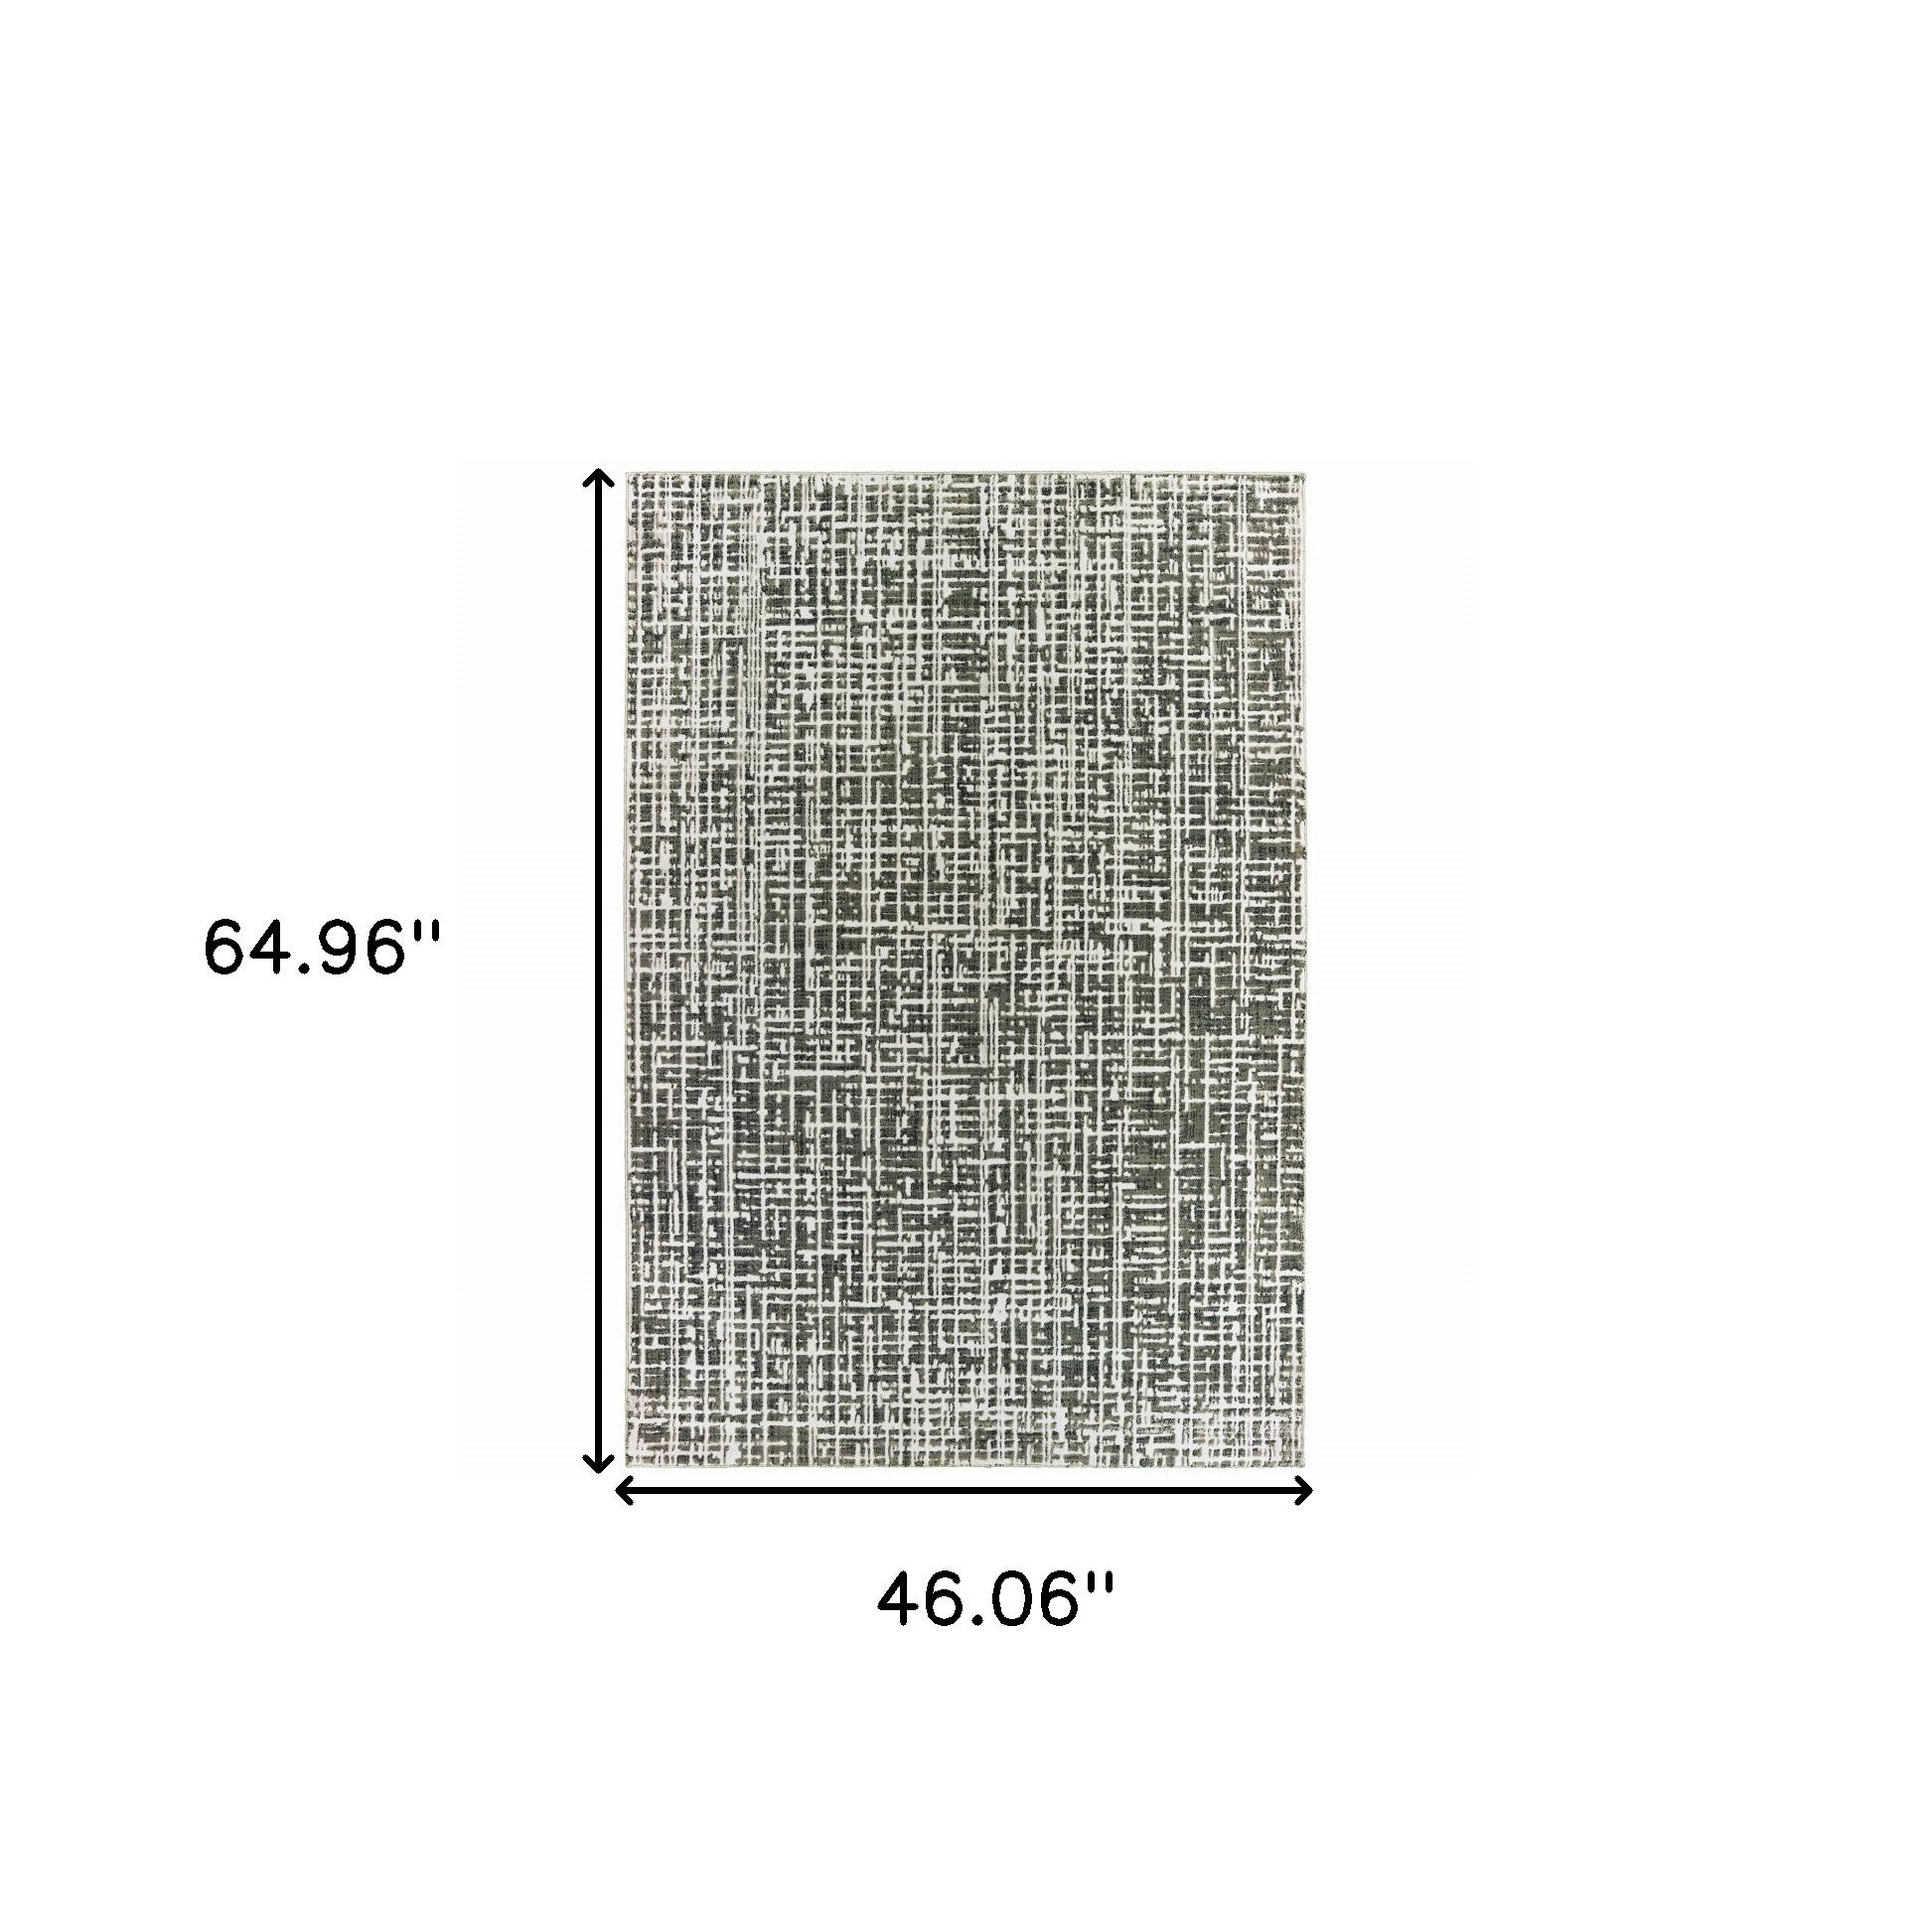 4' X 6' Grey And Ivory Abstract Power Loom Stain Resistant Area Rug